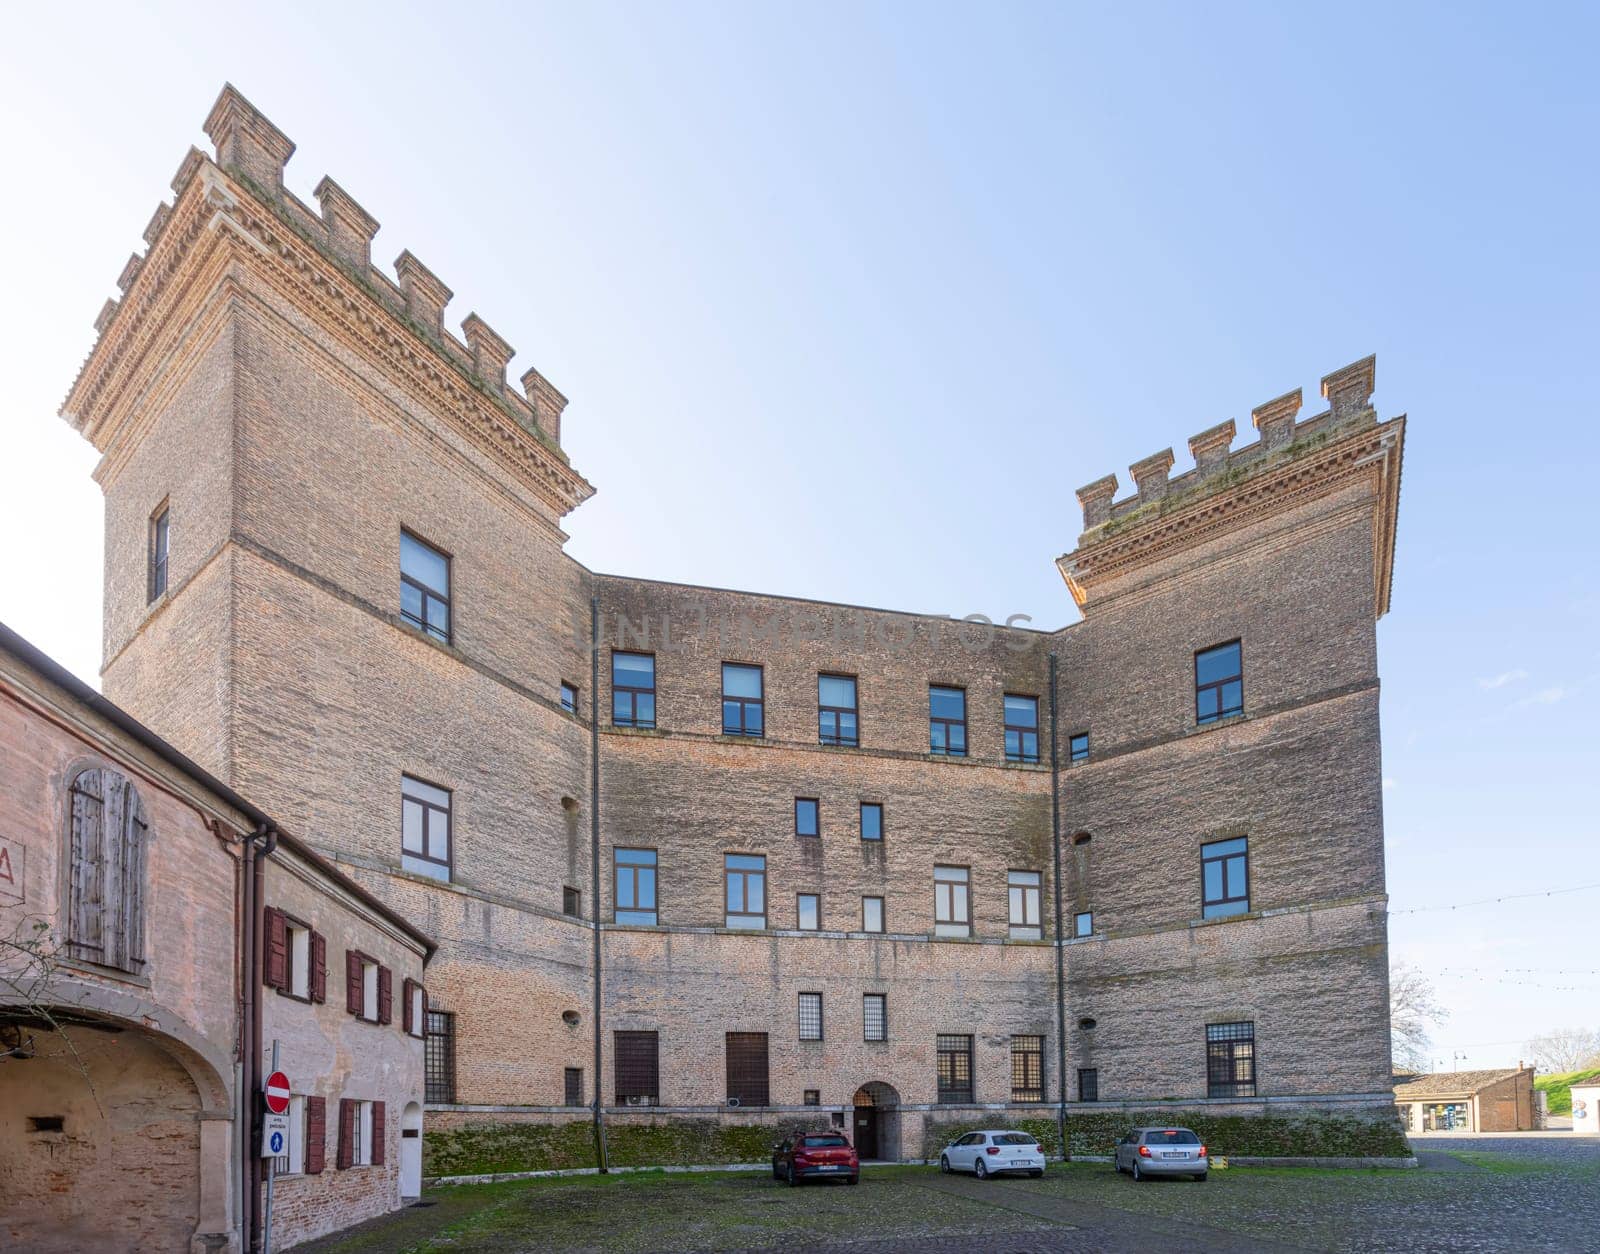 Mesola, Italy. February 25, 2024.  Exterior view of the ancient Mesola Castle in the town center